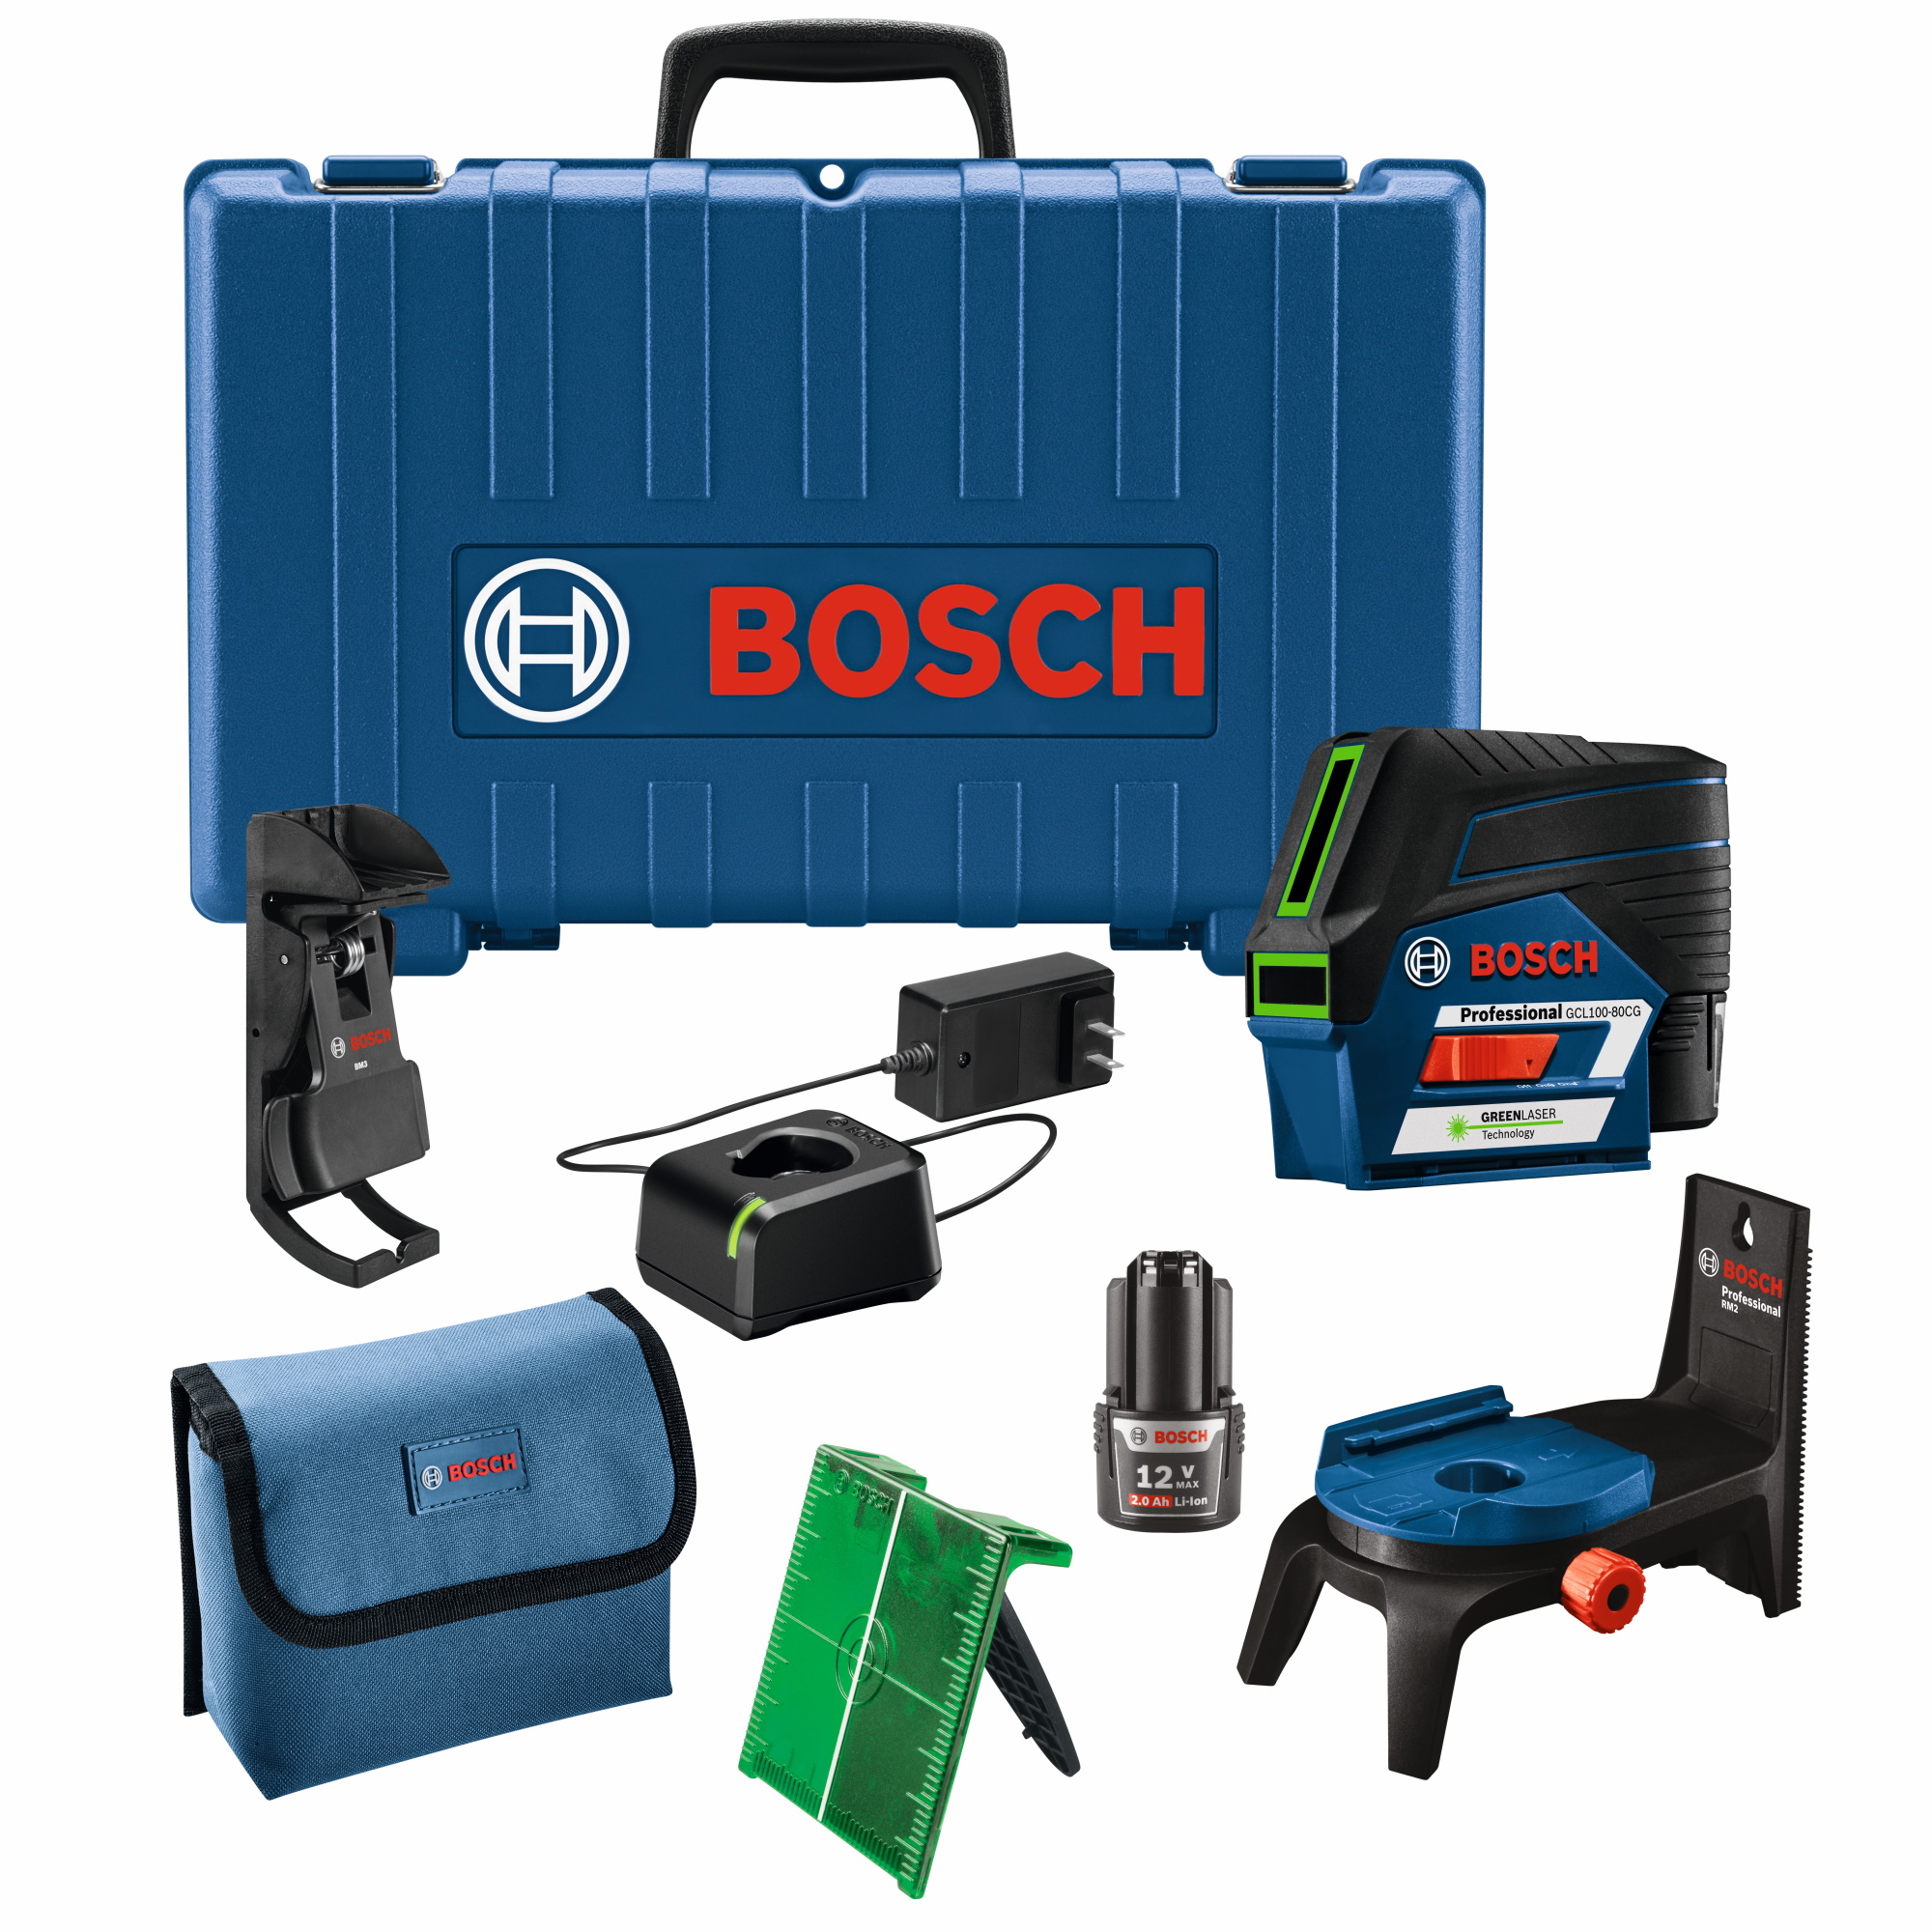 Bosch 12V Max Connected Green-Beam Cross-Line Laser with Plumb